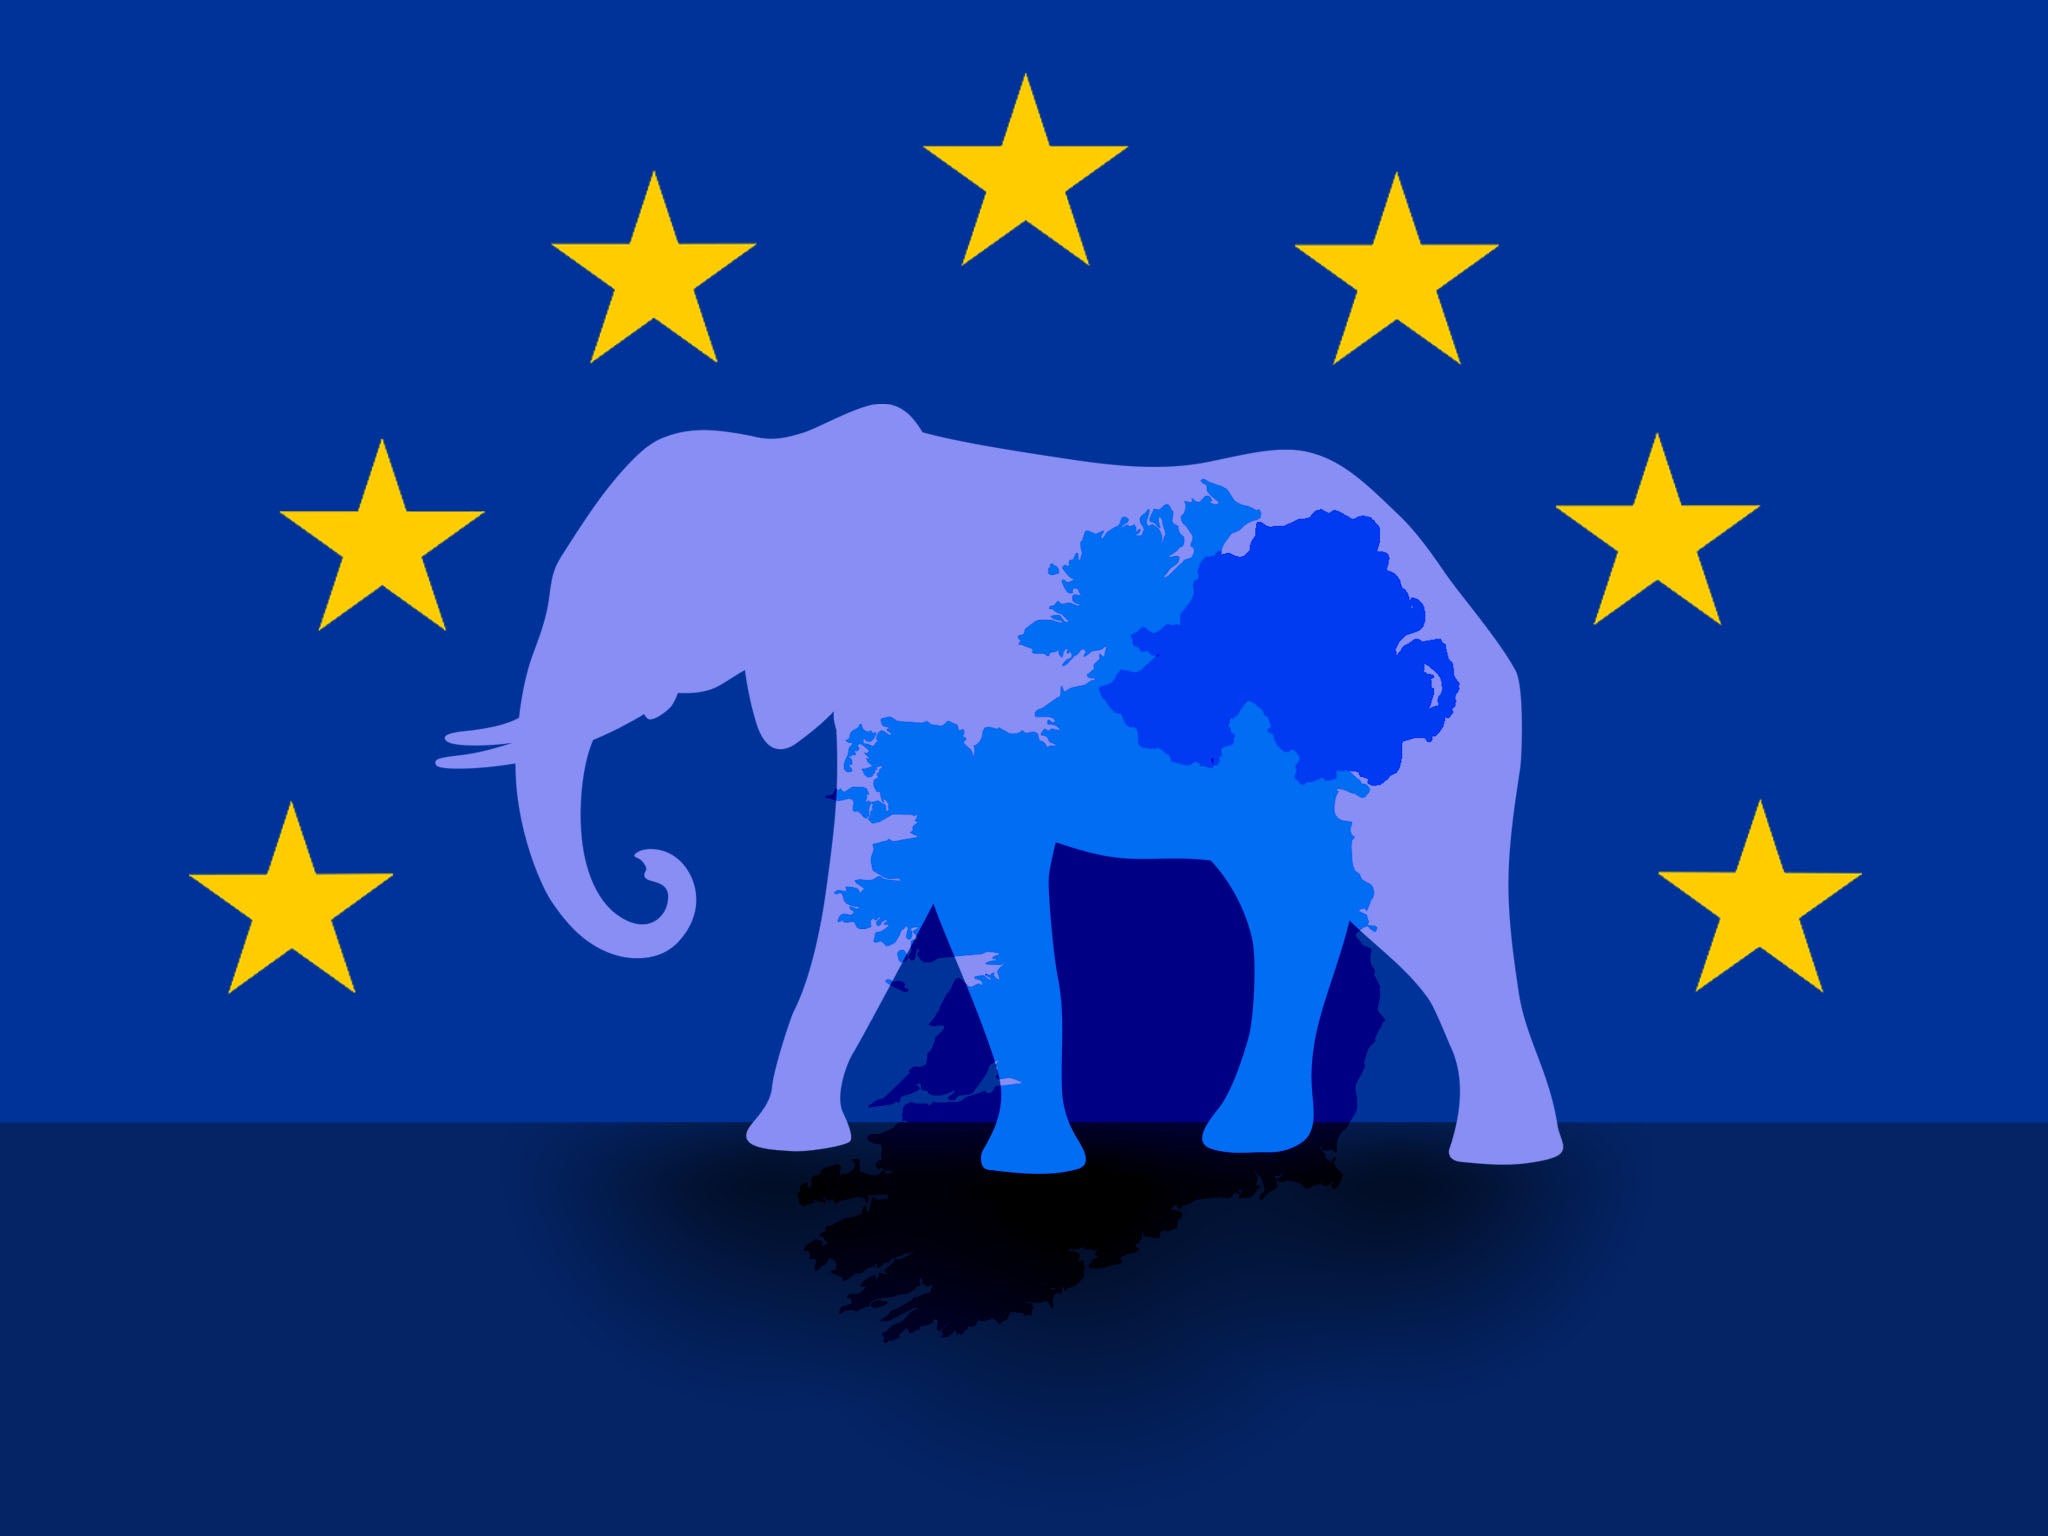 Brexit has become the gigantic elephant in the room, trampling over our economy, society and environment to its heart’s content